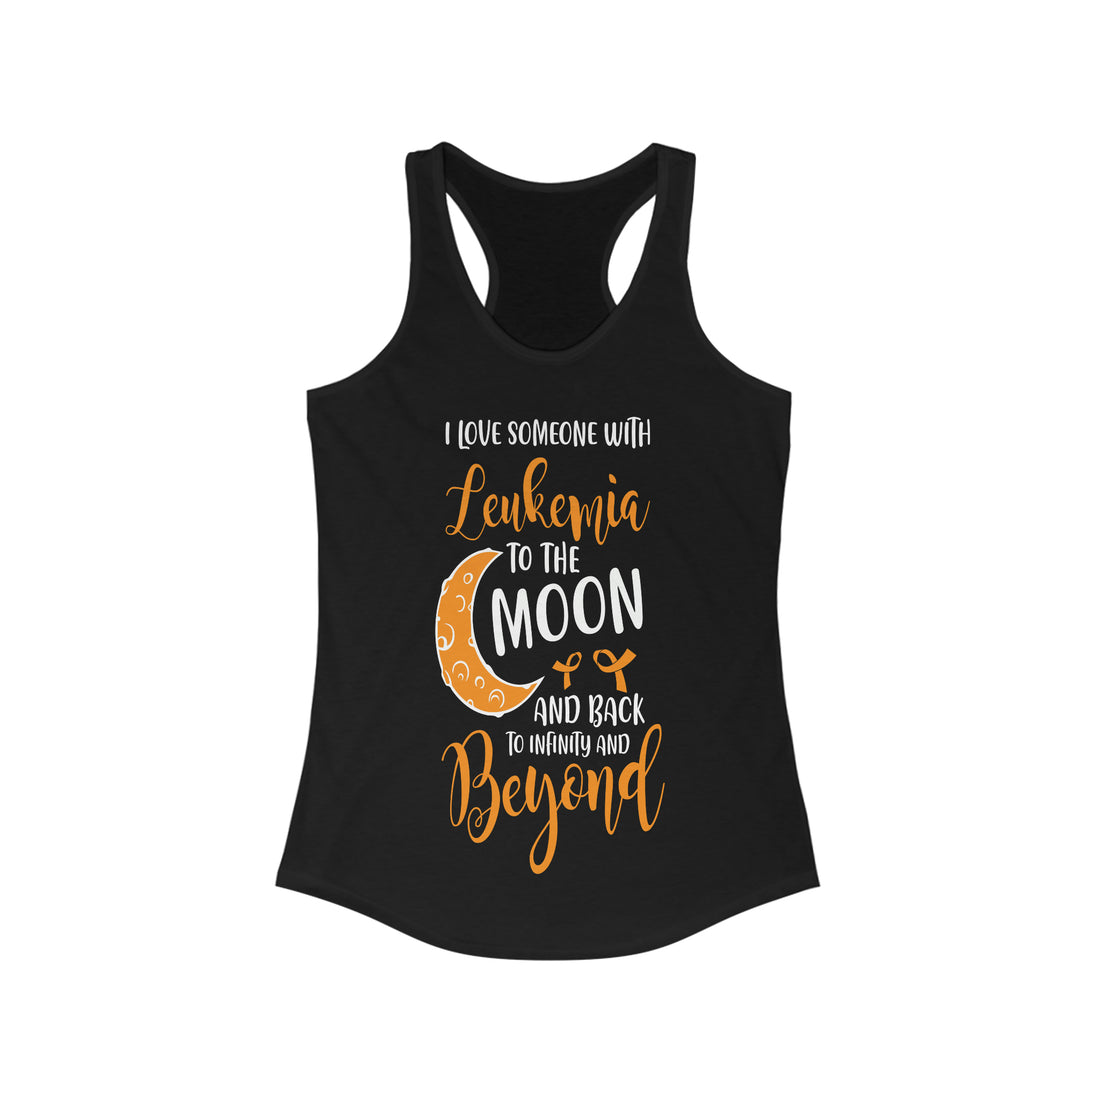 I Love Someone With Leukemia To The Moon And Back - Racerback Tank Top